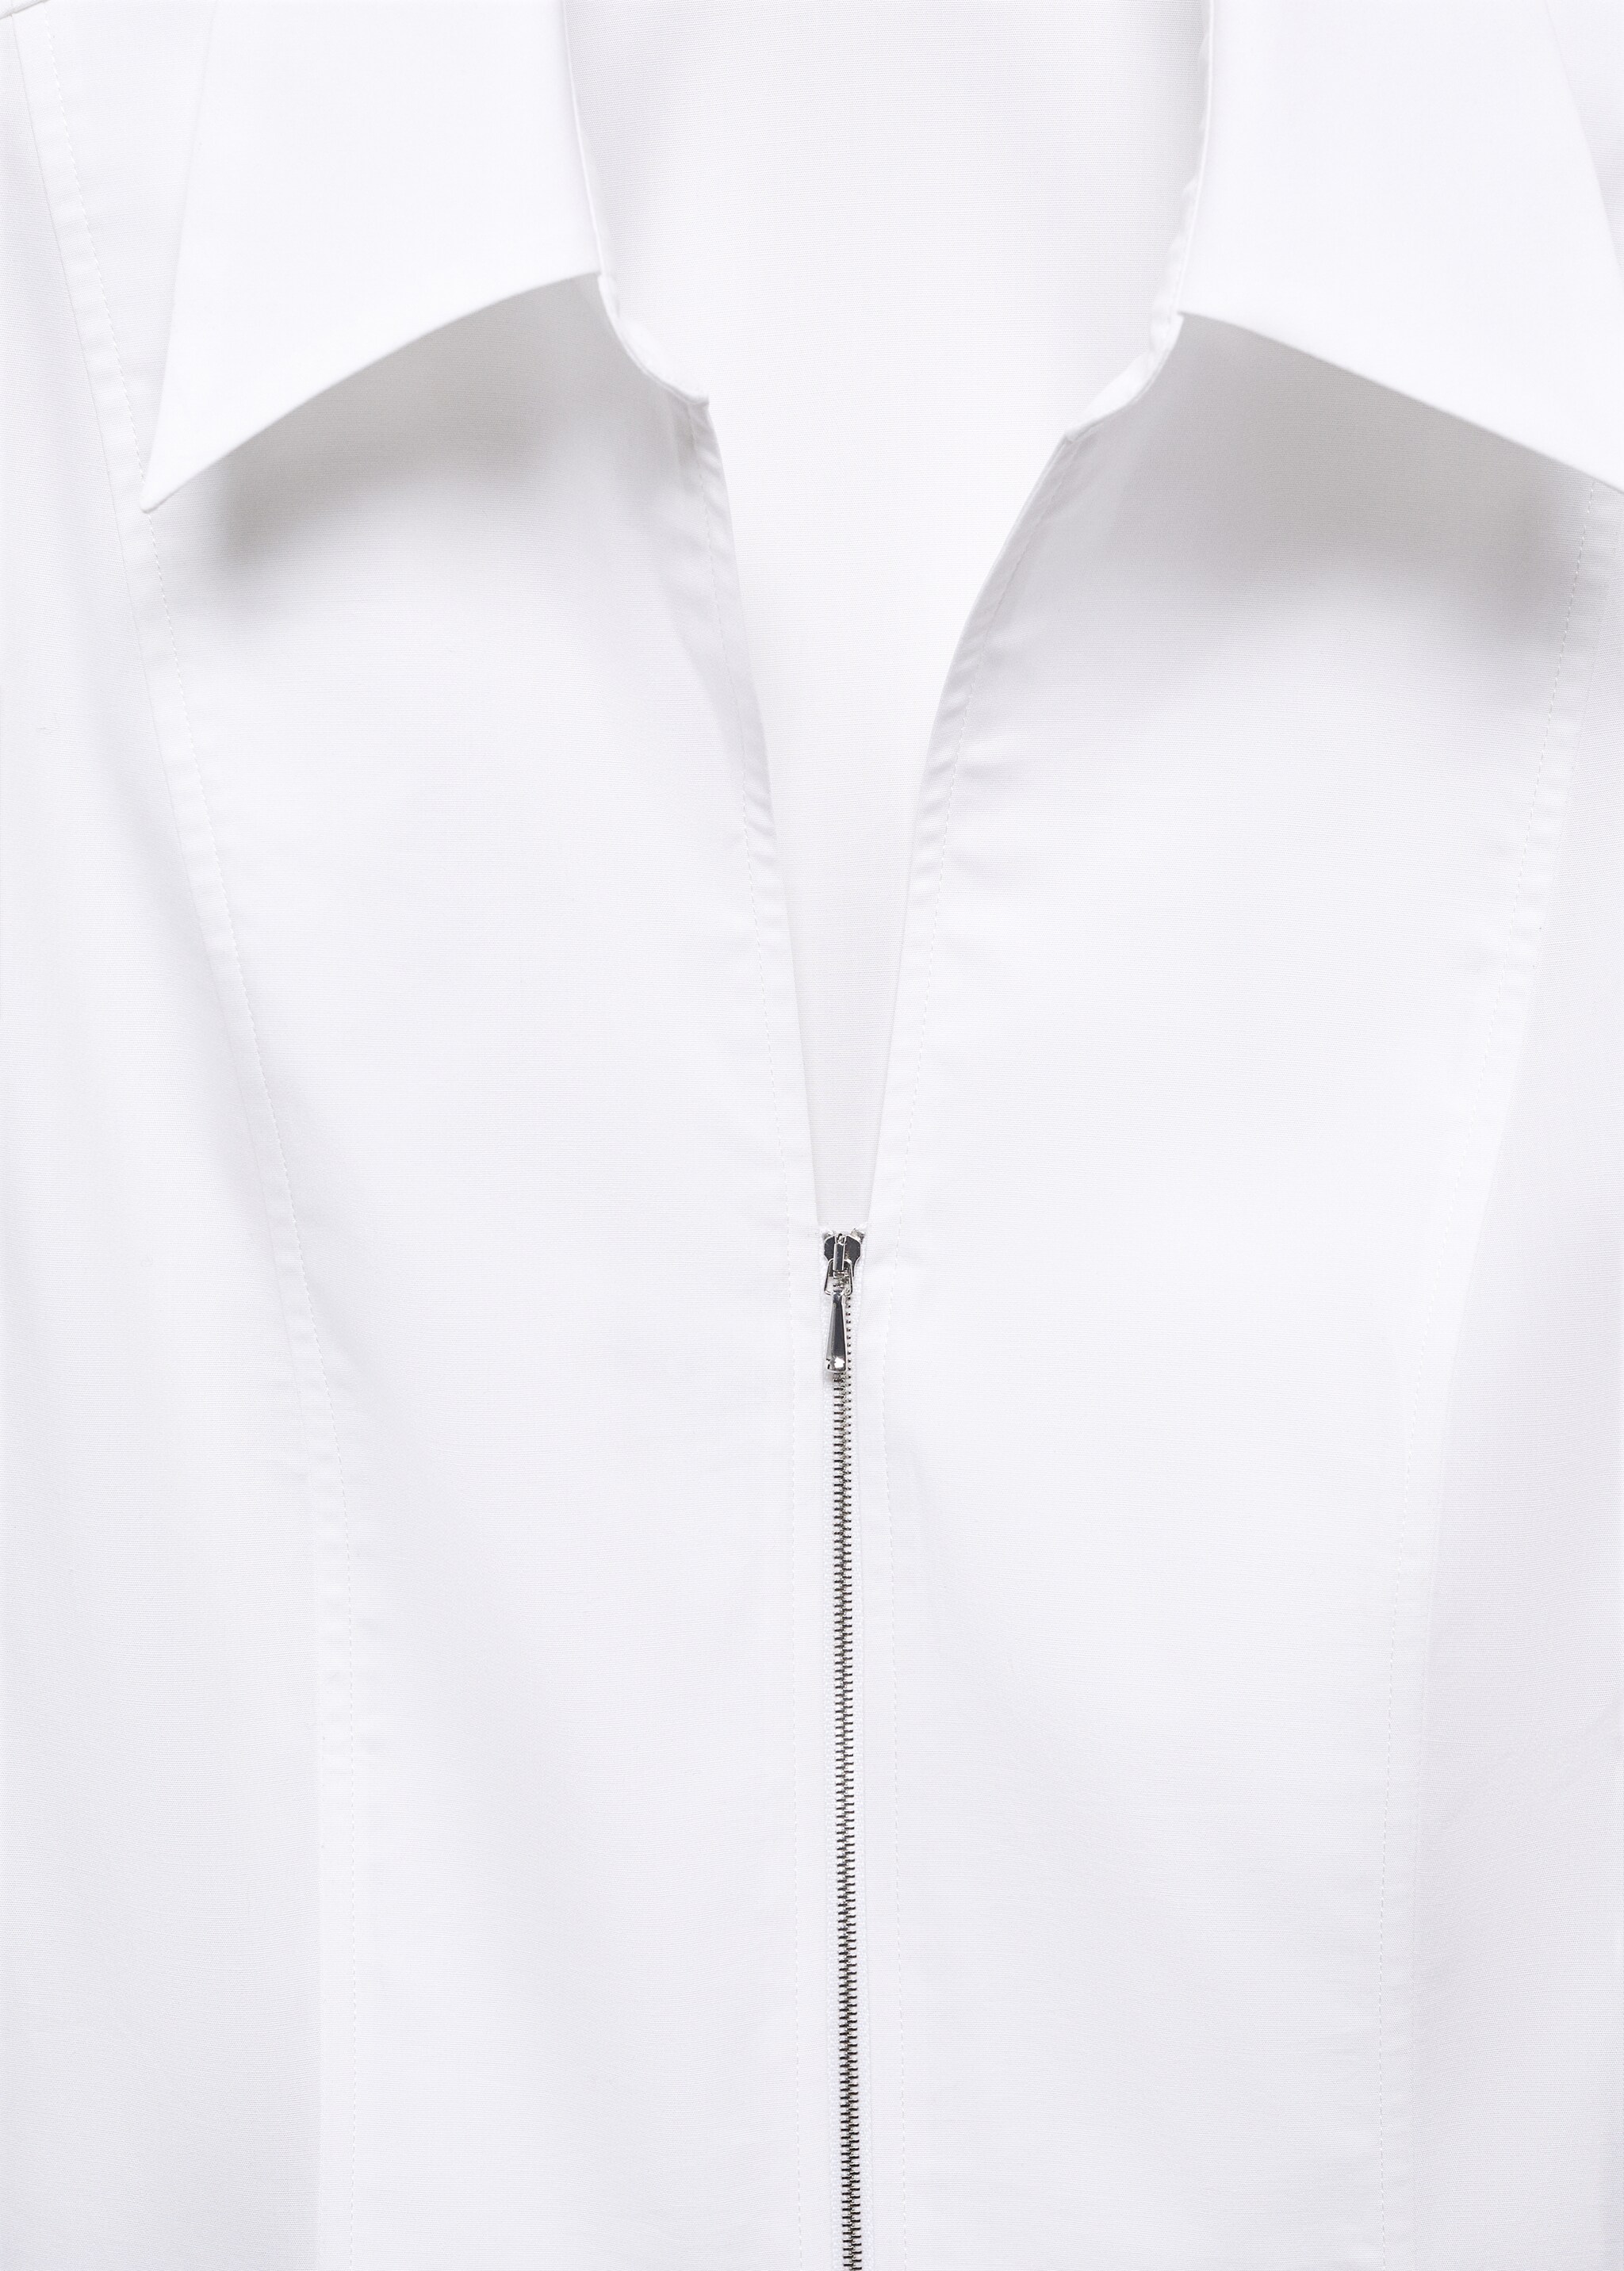 Fitted cotton zipper shirt - Details of the article 8